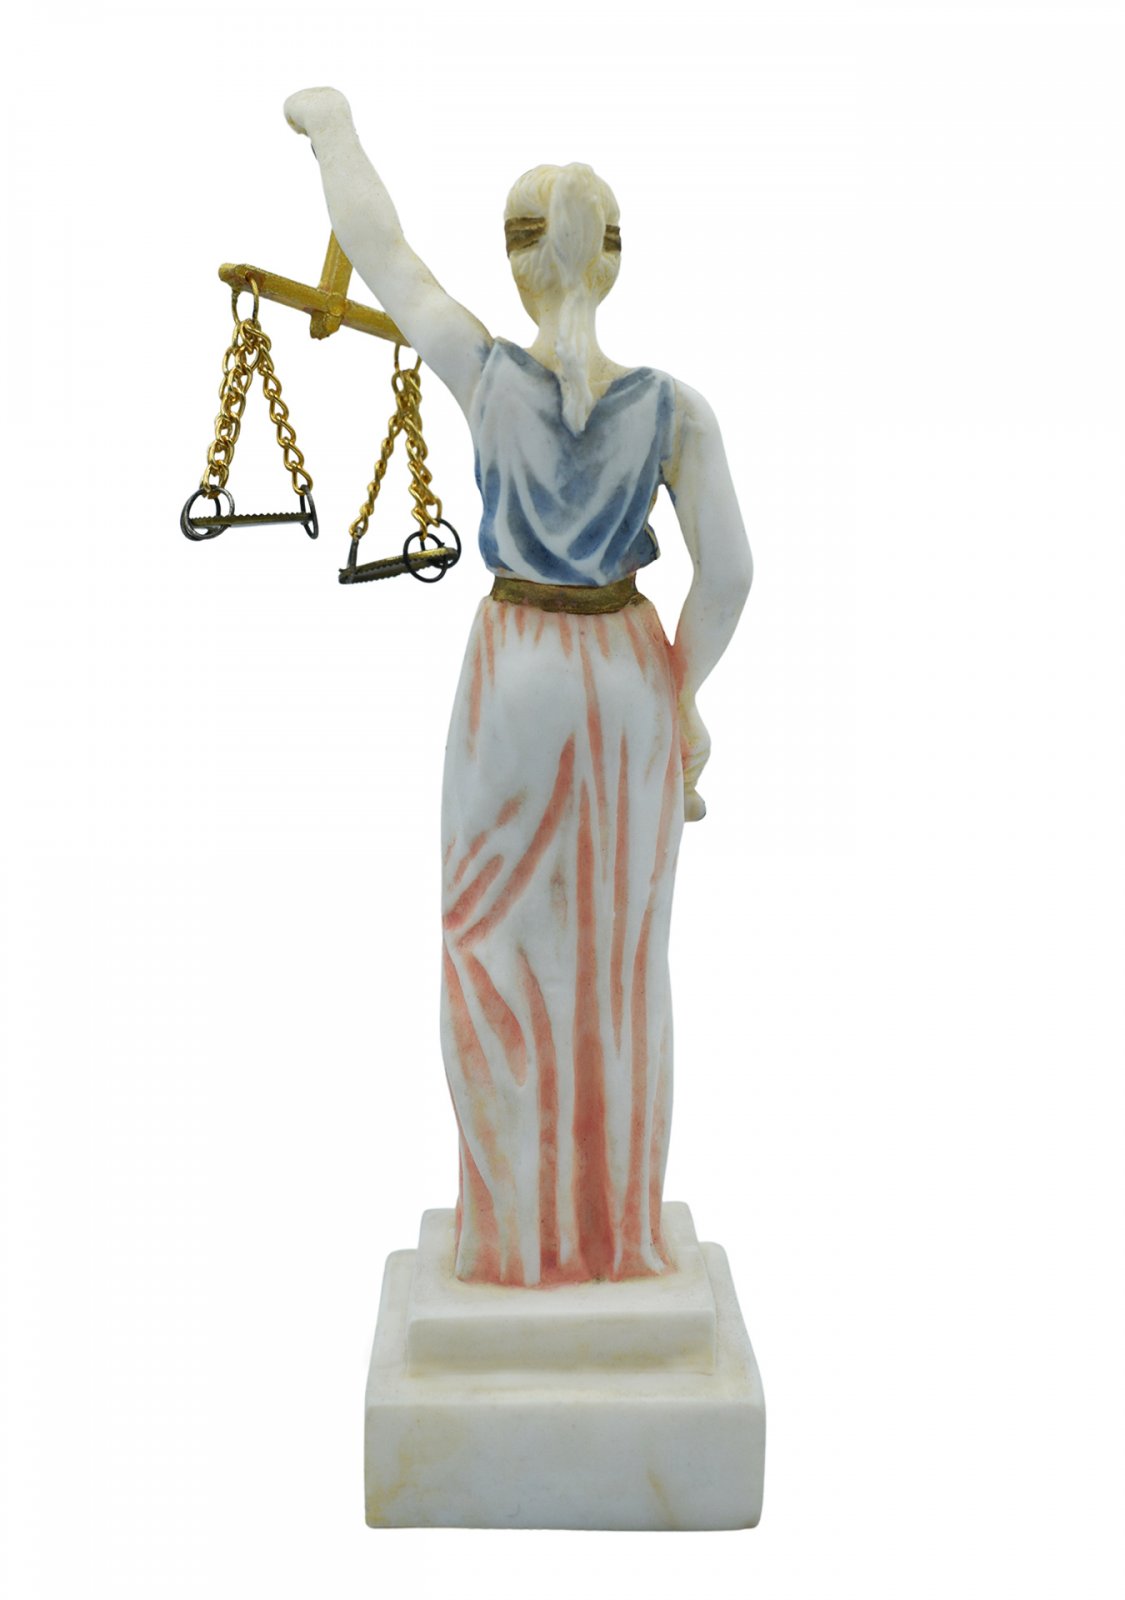 Themis, the greek goddess of justice, small alabaster statue